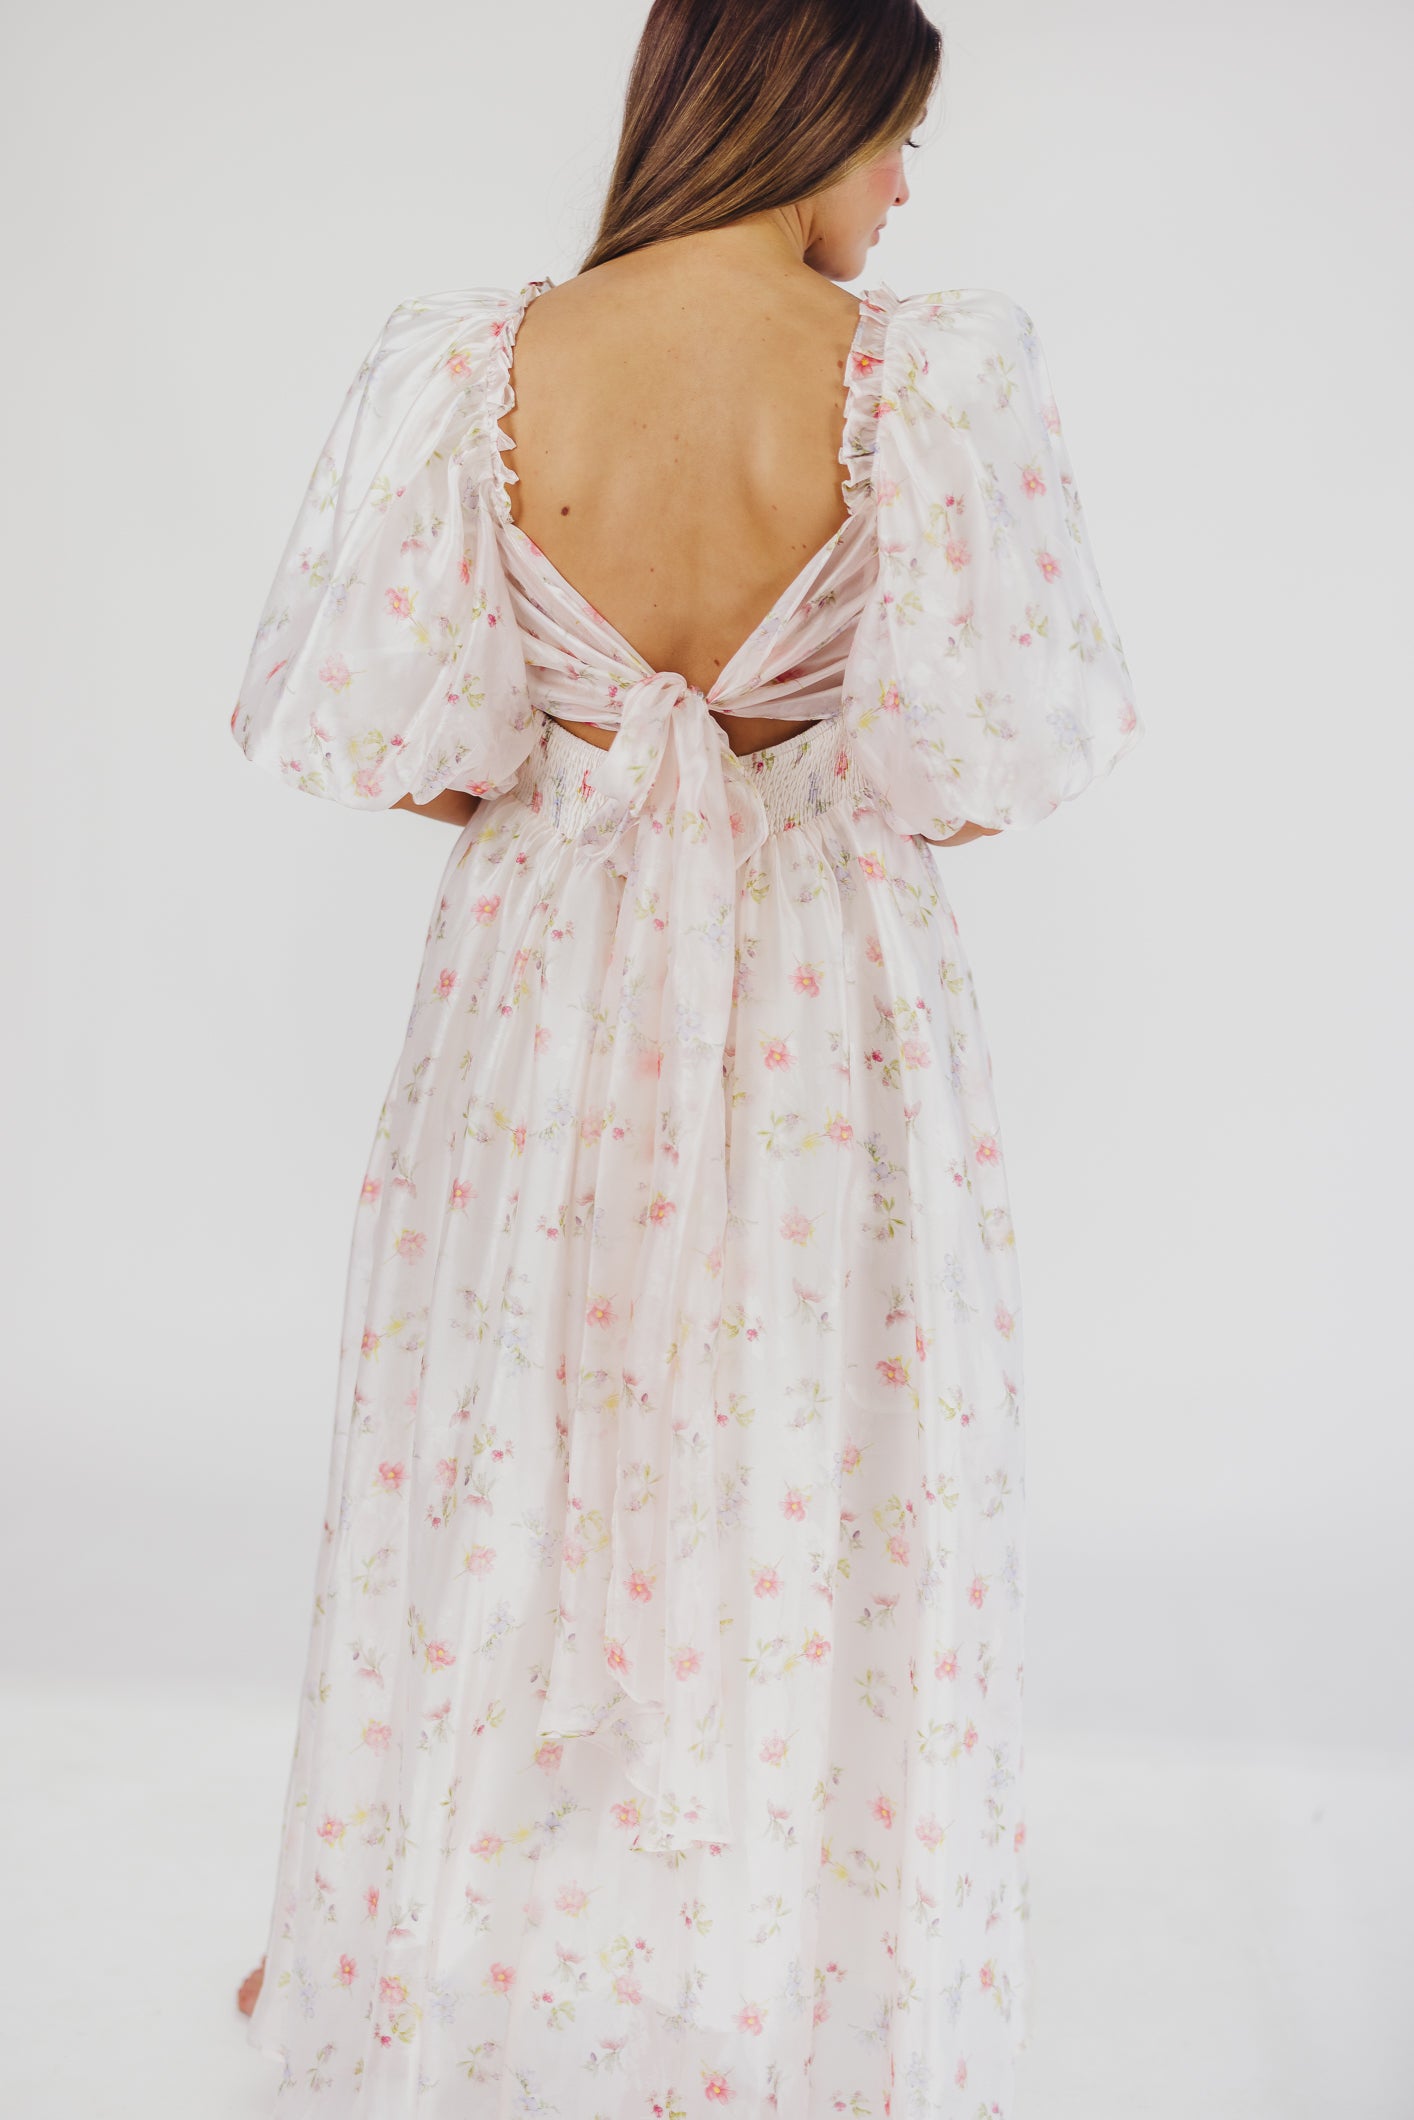 Melody Maxi Dress with Pleats and Bow Detail in Pink Rose Floral - Bump Friendly & Inclusive Sizing (S-3XL) ($40 OFF THIS WEEK)